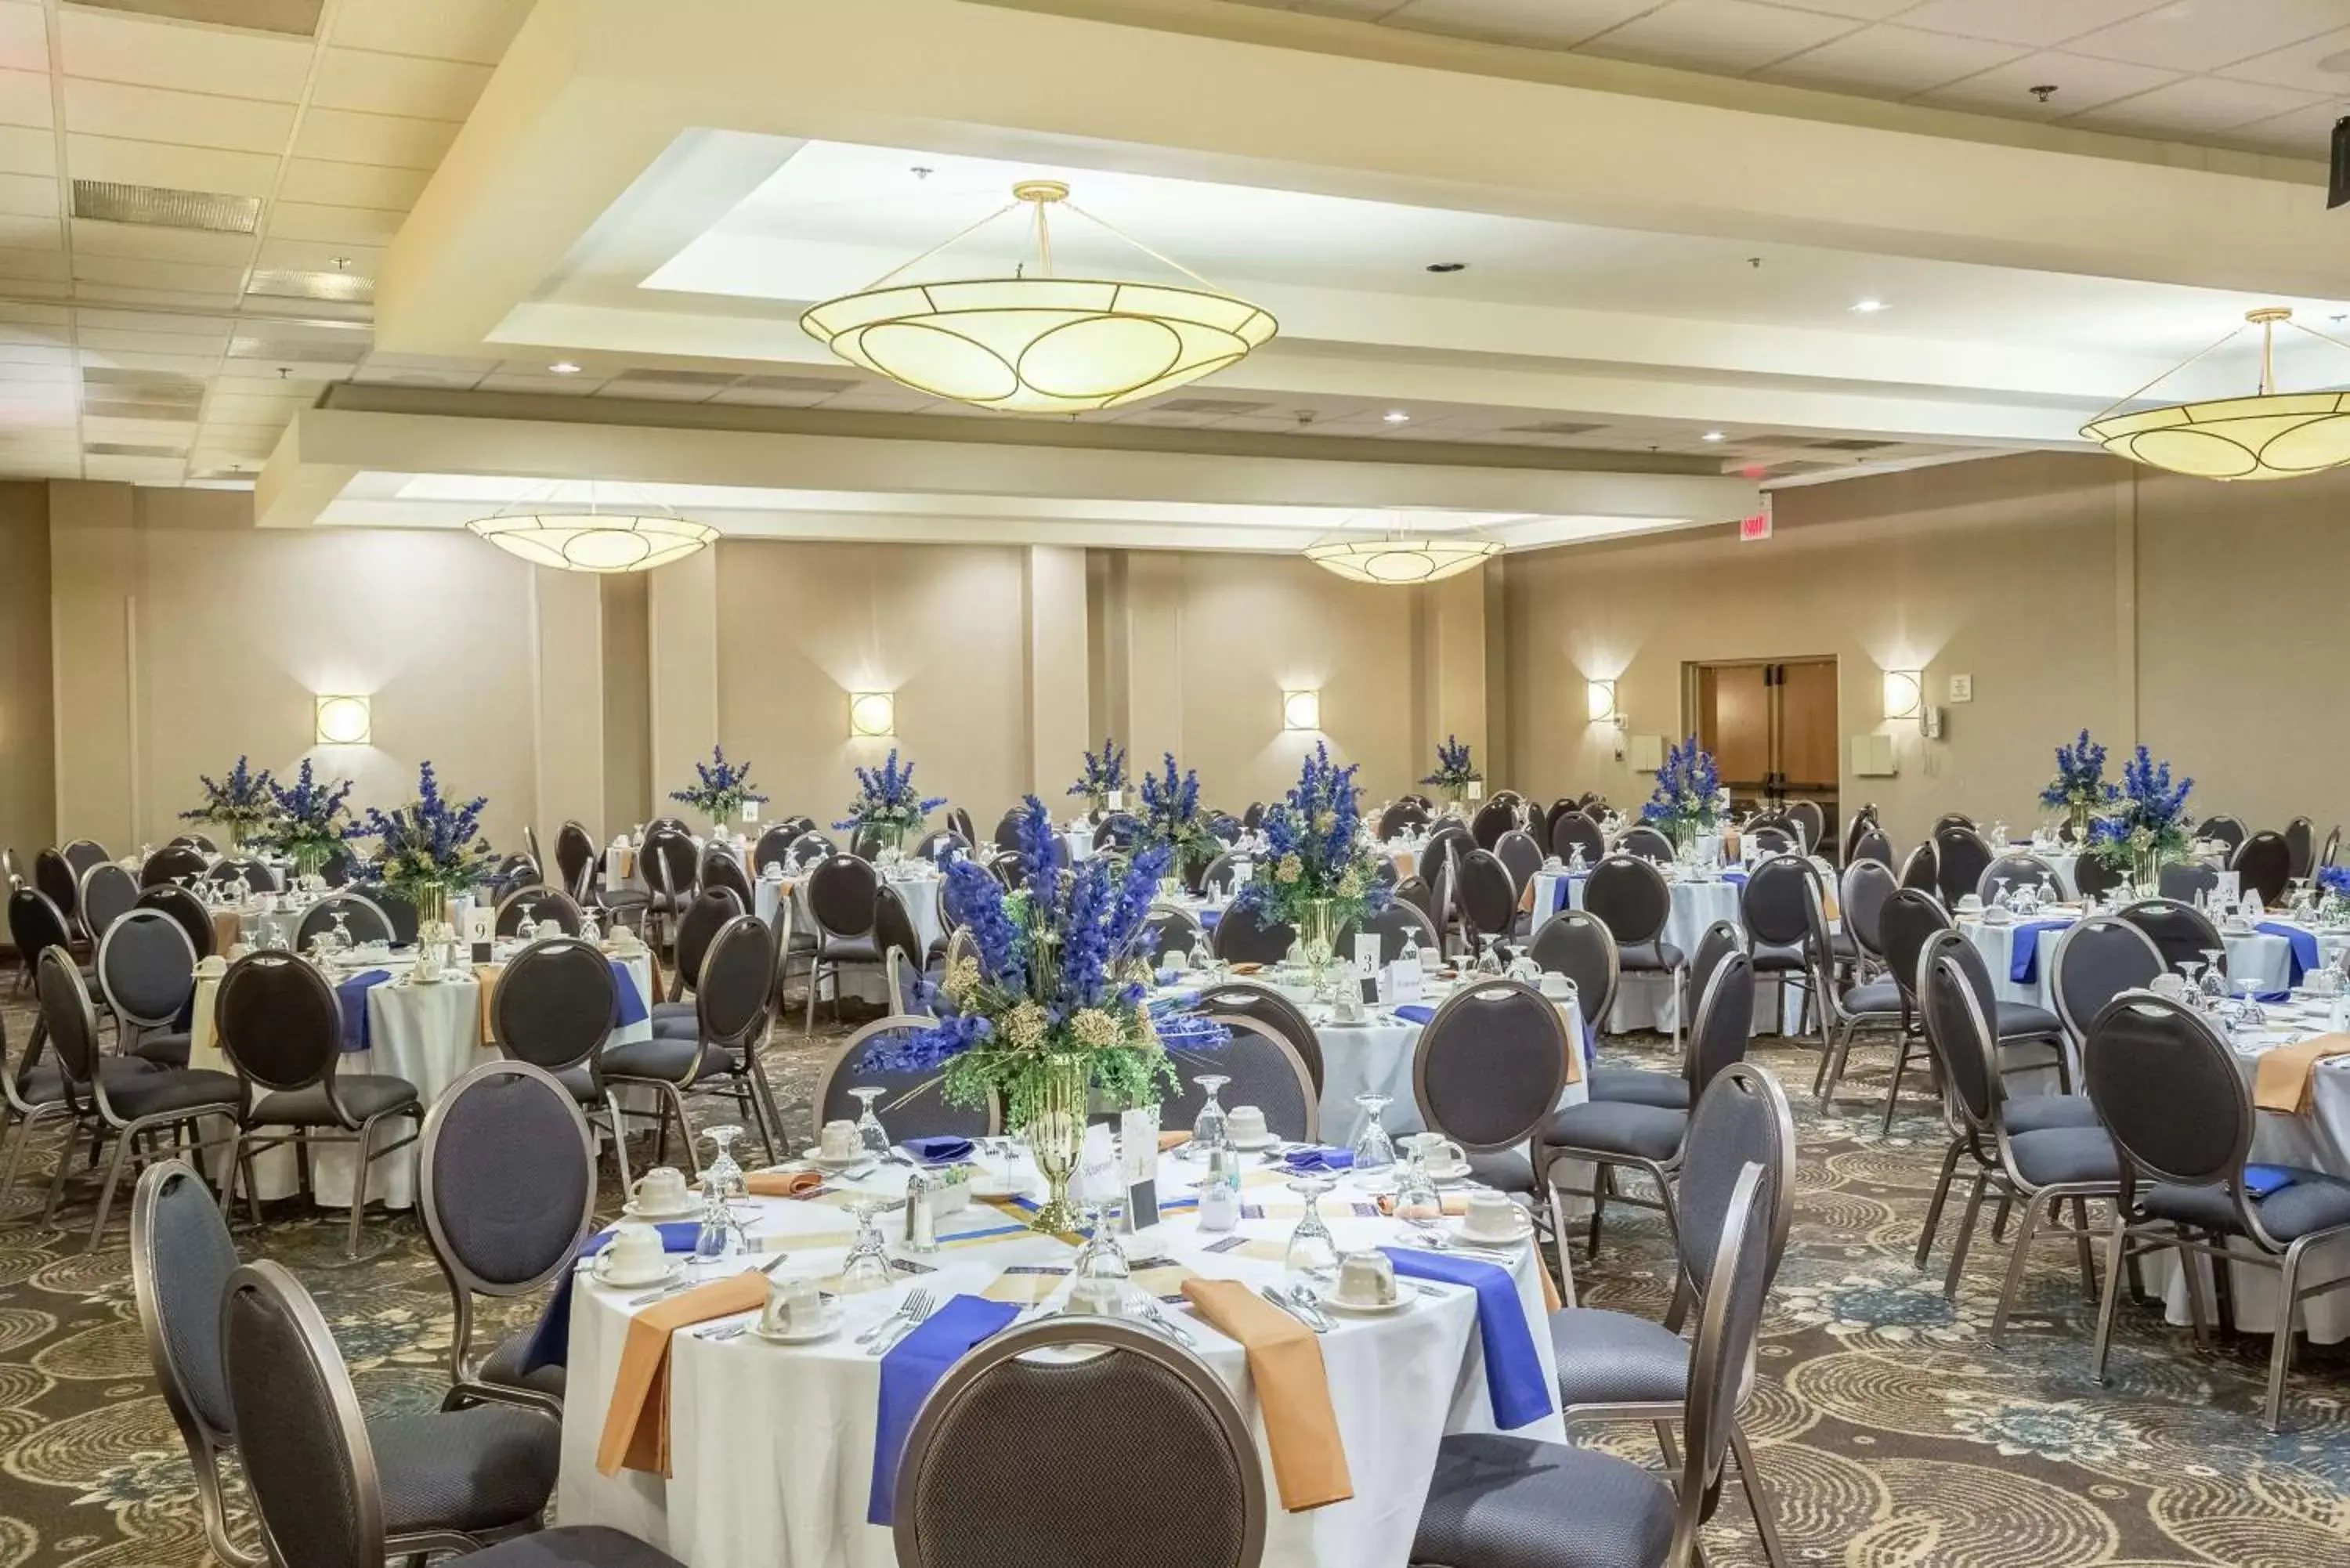 Meeting/conference room, Banquet Facilities in DoubleTree by Hilton Hotel Oak Ridge - Knoxville